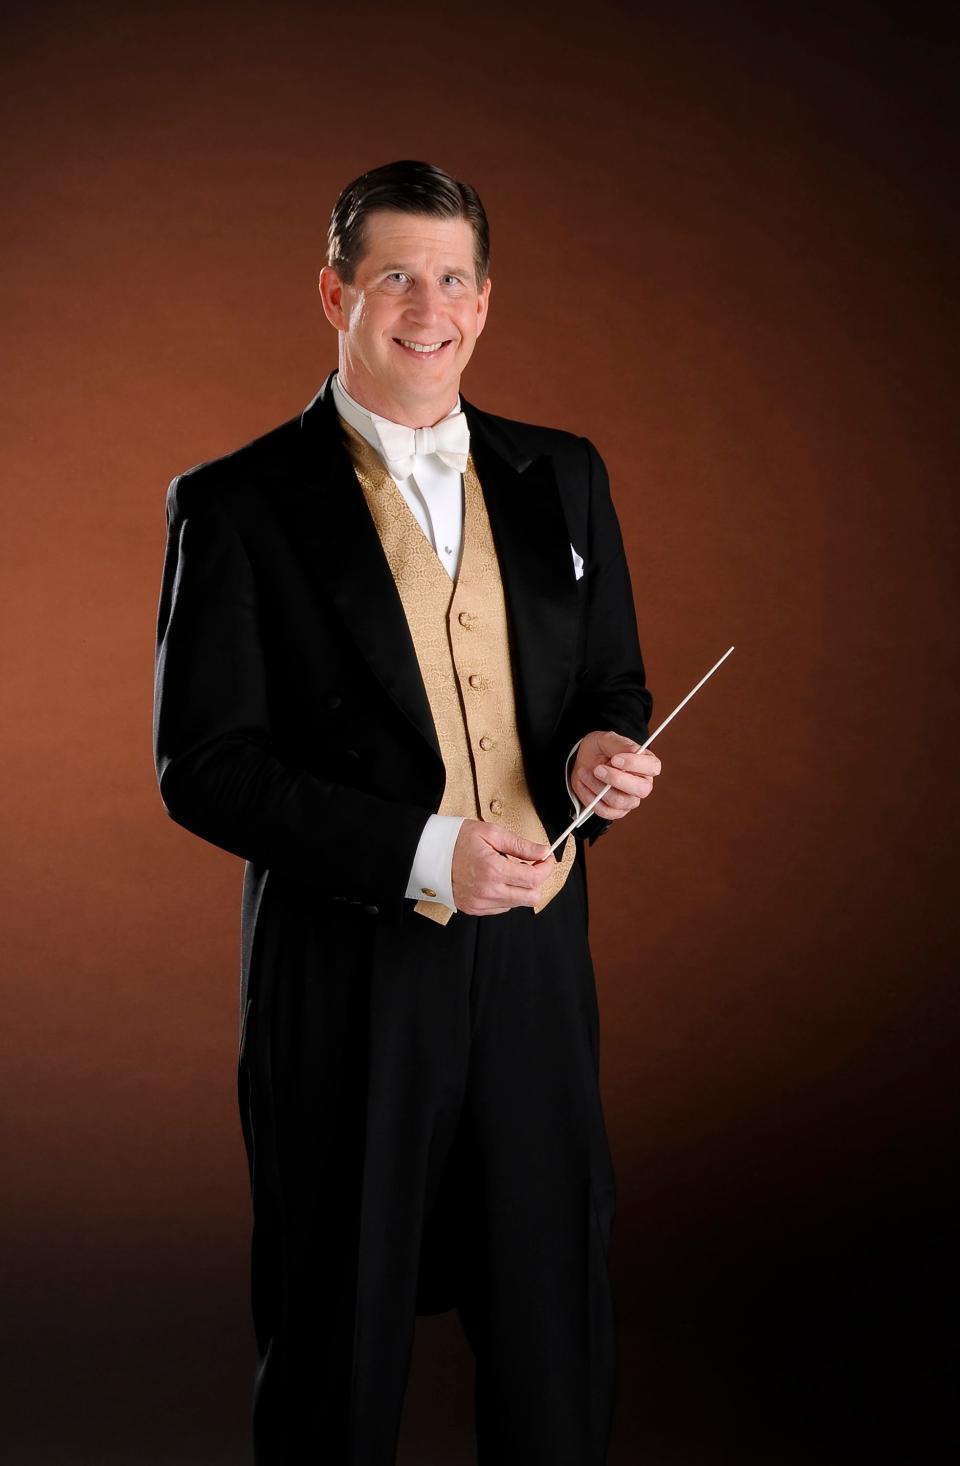 Leif Bjaland led the Sarasota Orchestra from 1997 until 2012, a period of major artistic growth for the organization.